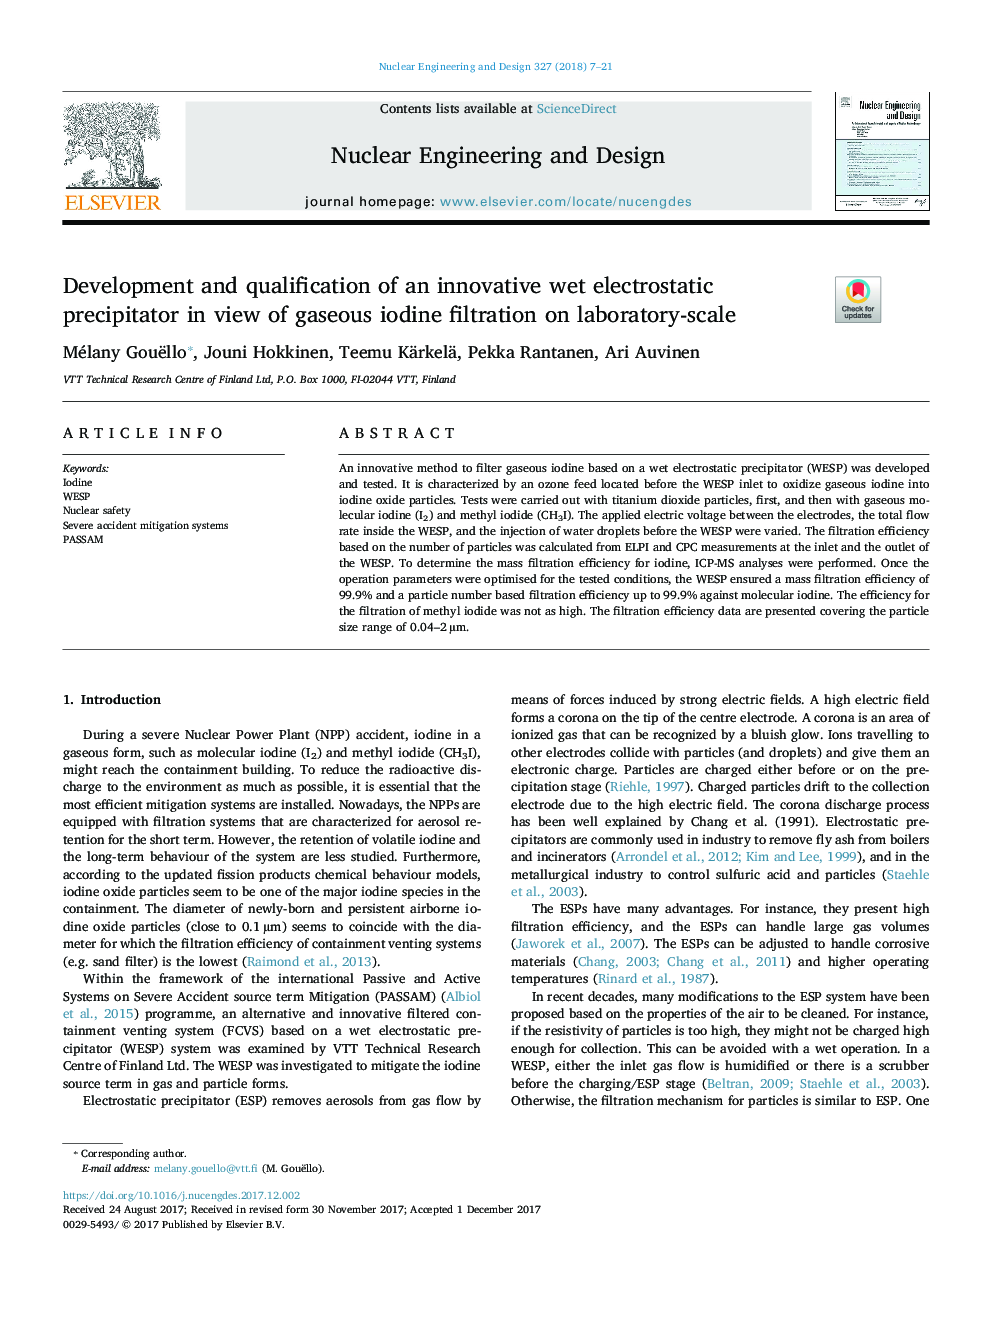 Development and qualification of an innovative wet electrostatic precipitator in view of gaseous iodine filtration on laboratory-scale